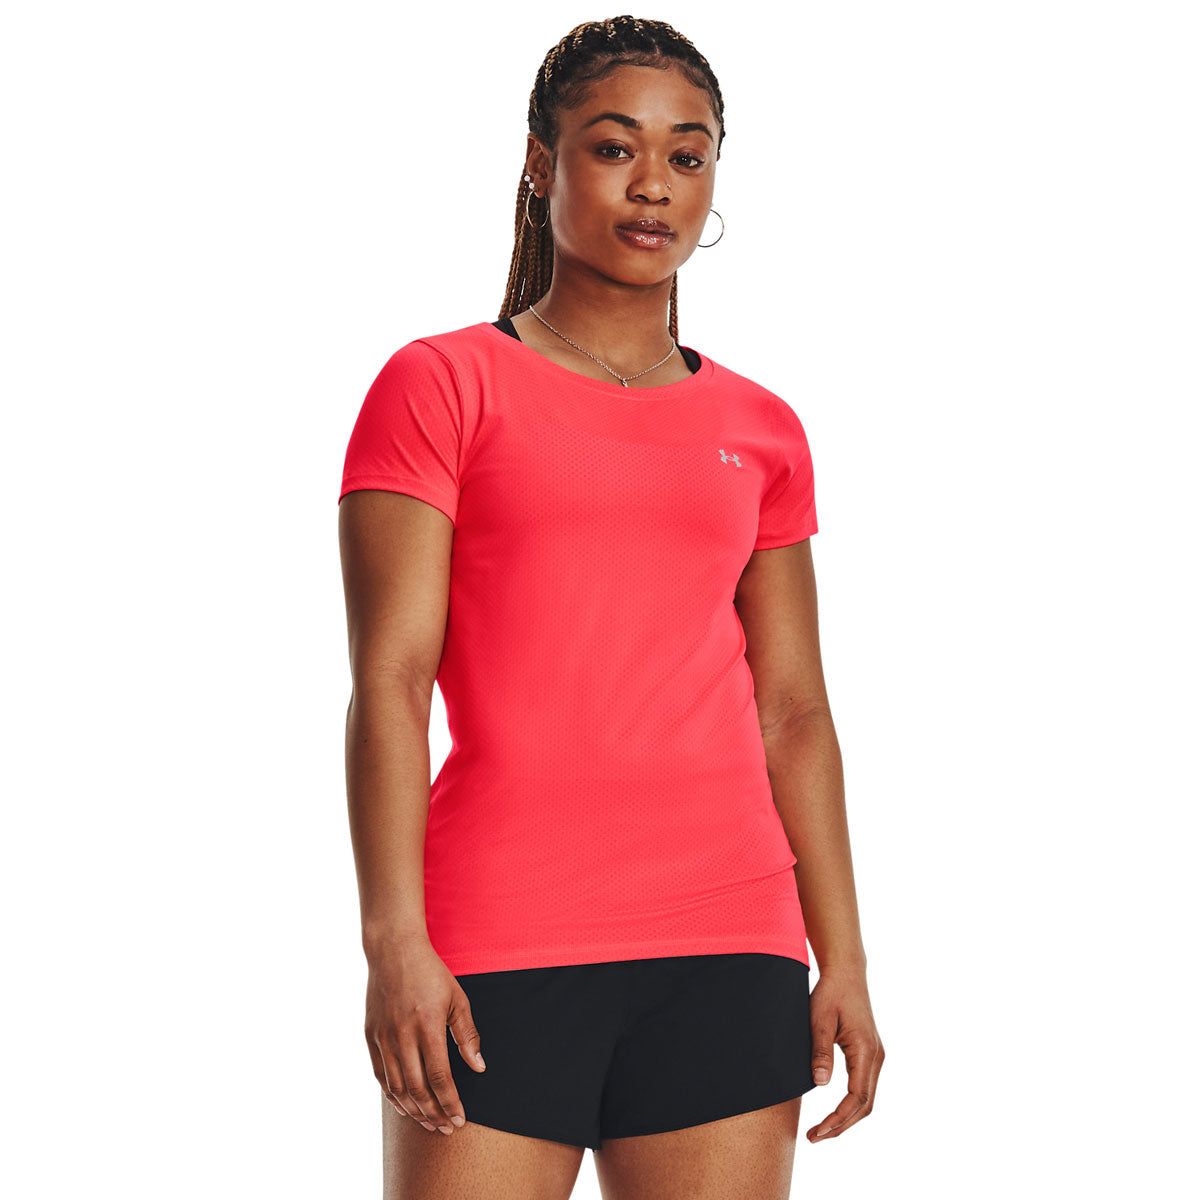 New with tags Under Armour Women's Heat Gear Freedom tee, size XS.